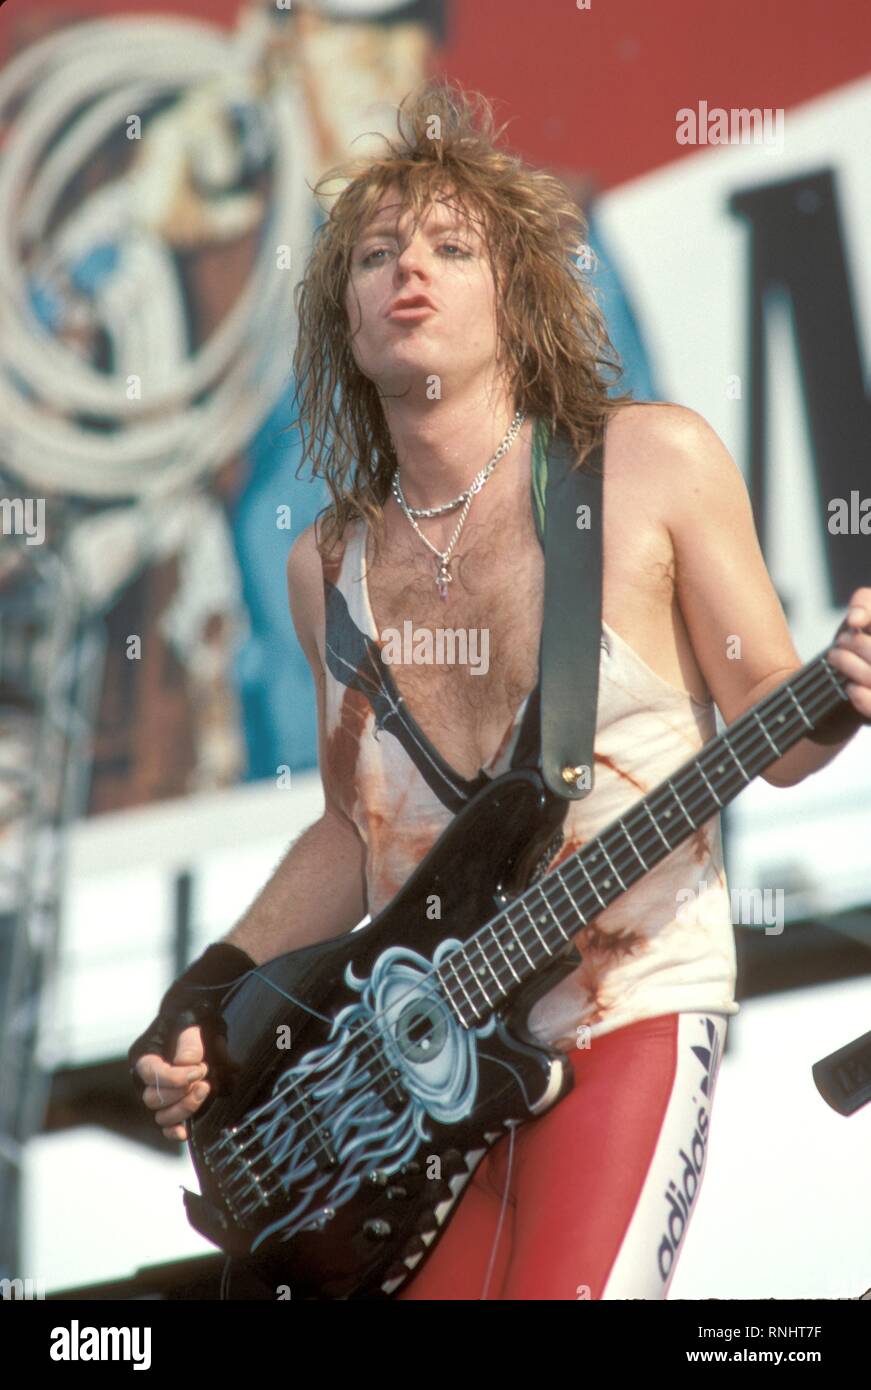 Bassist Jeff Pilson is shown performing on stage during a Dokken concert  Stock Photo - Alamy